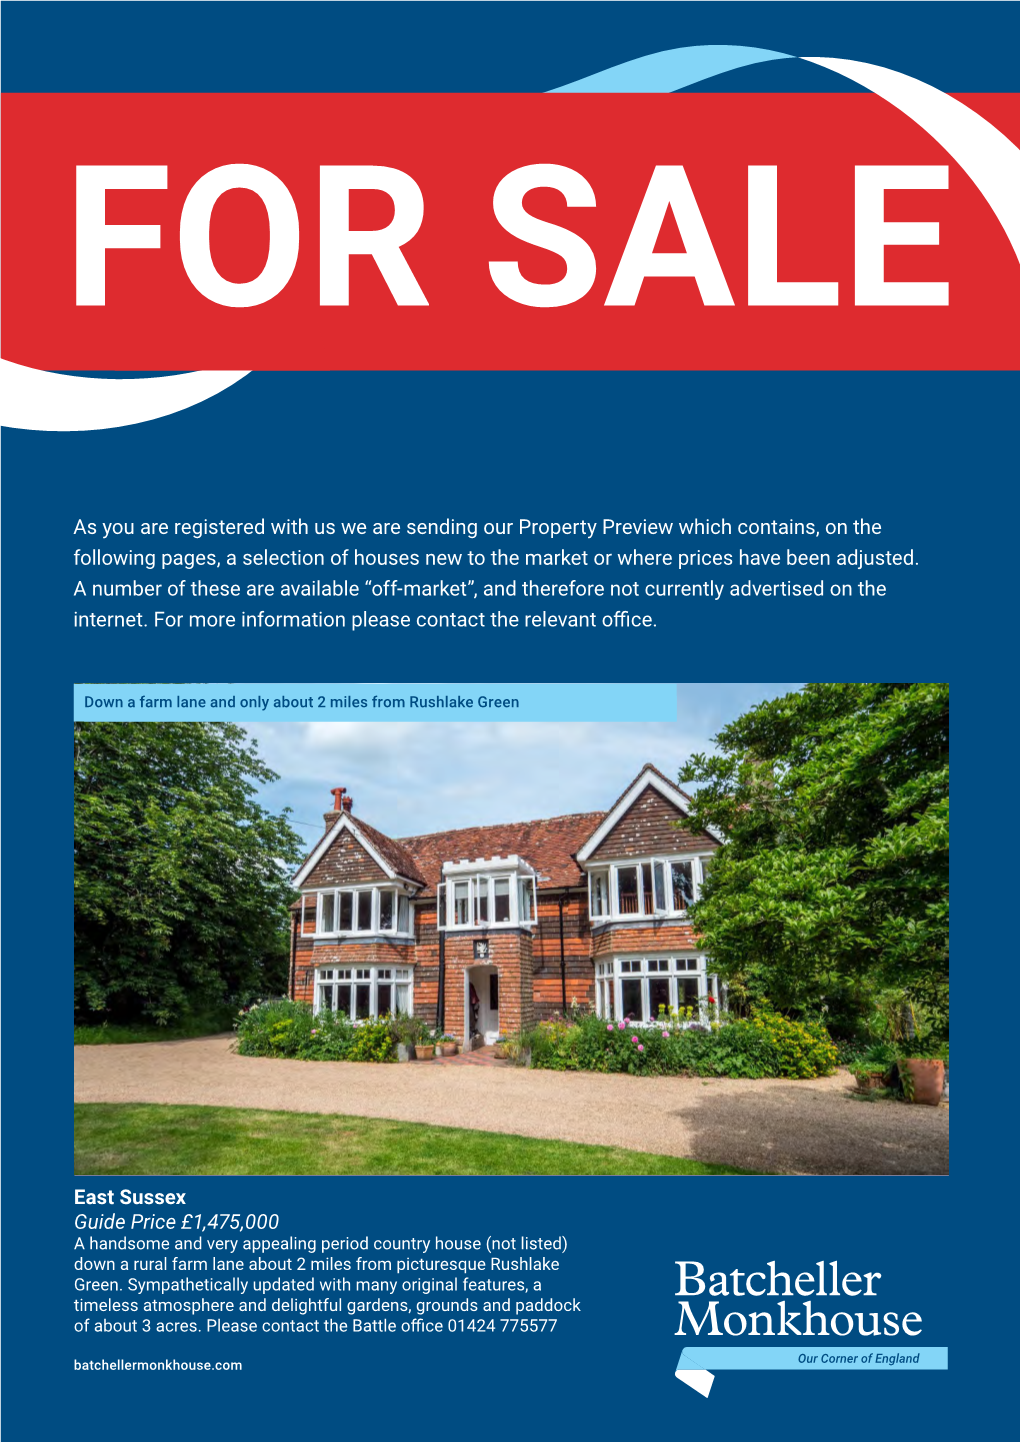 East Sussex Guide Price £1,475,000 As You Are Registered with Us We